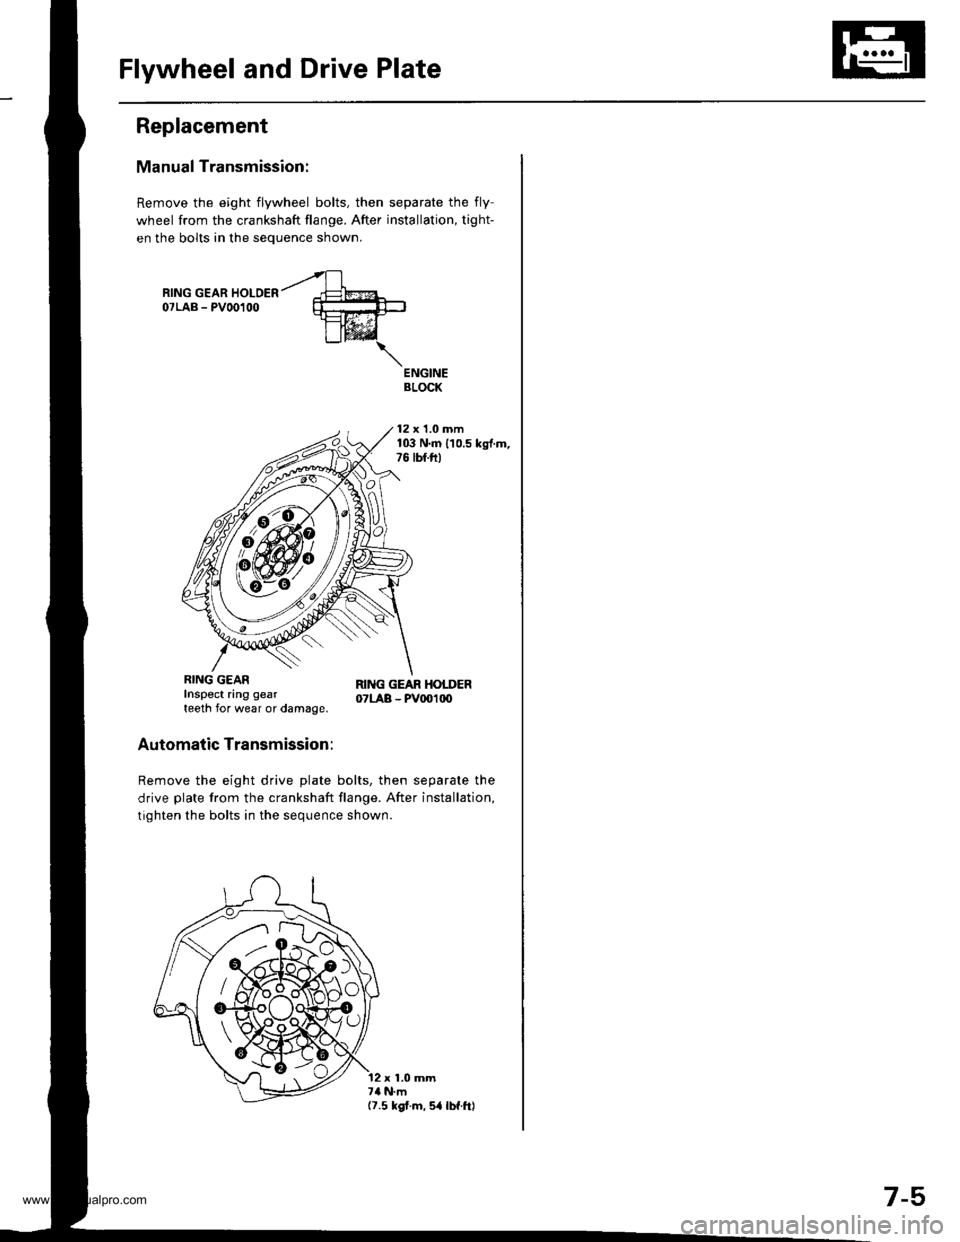 HONDA CR-V 1999 RD1-RD3 / 1.G Owners Manual 
Flywheel and Drive Plate
Replacement
Manual Transmission:
Remove the eight flywheel bolts, then separate the fly-
wheel from the crankshaft flange. After installation, tight-
en the bolts in the sequ